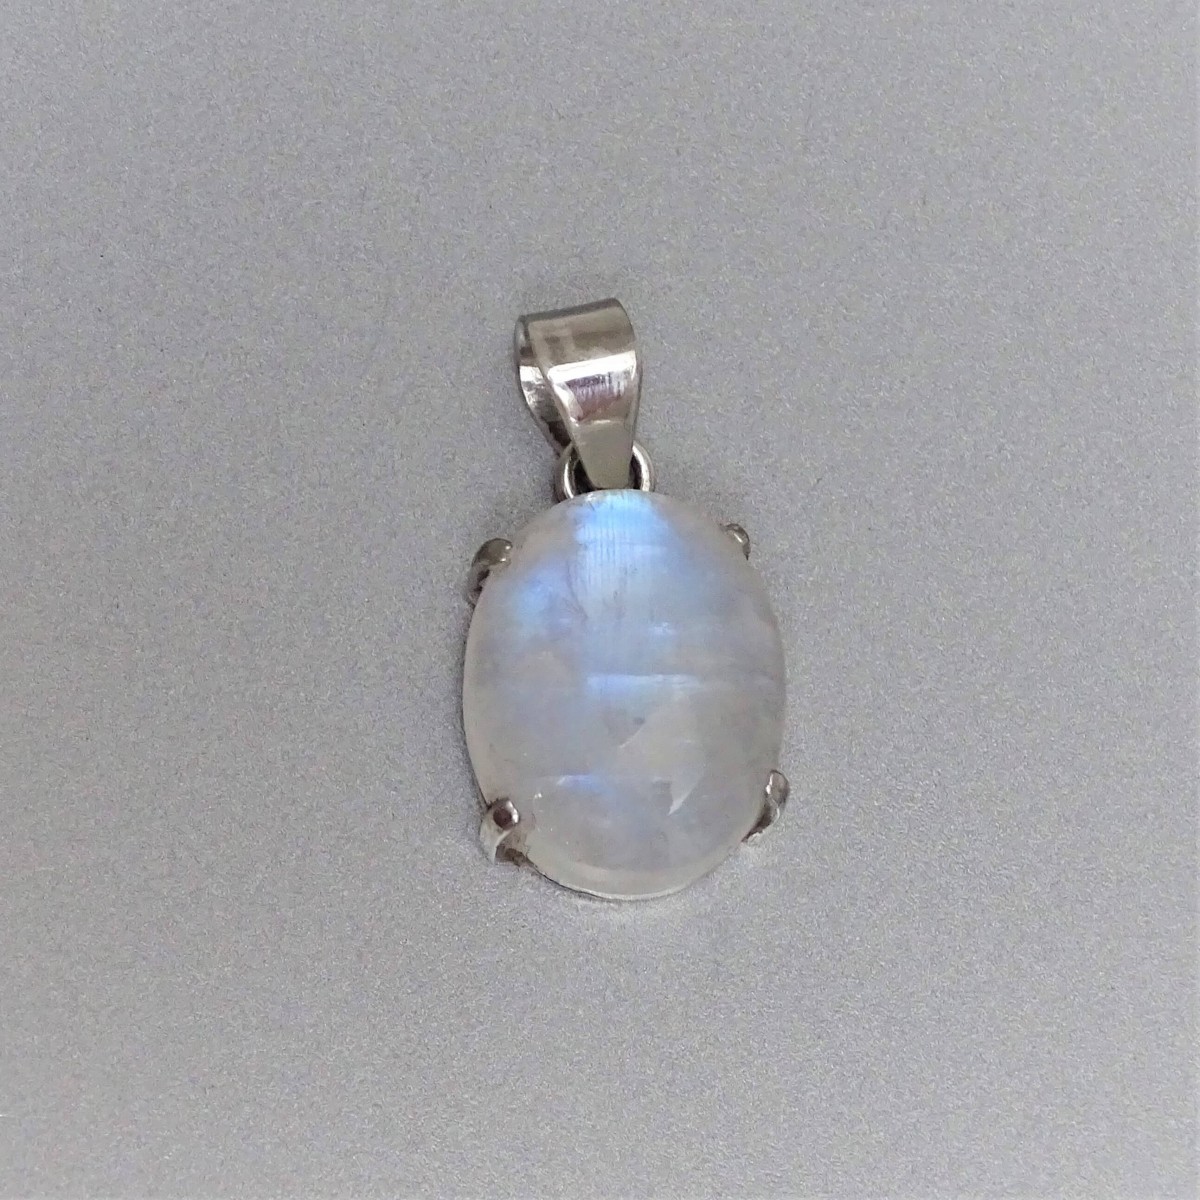 Moonstone pendant in silver 6.1g, top quality